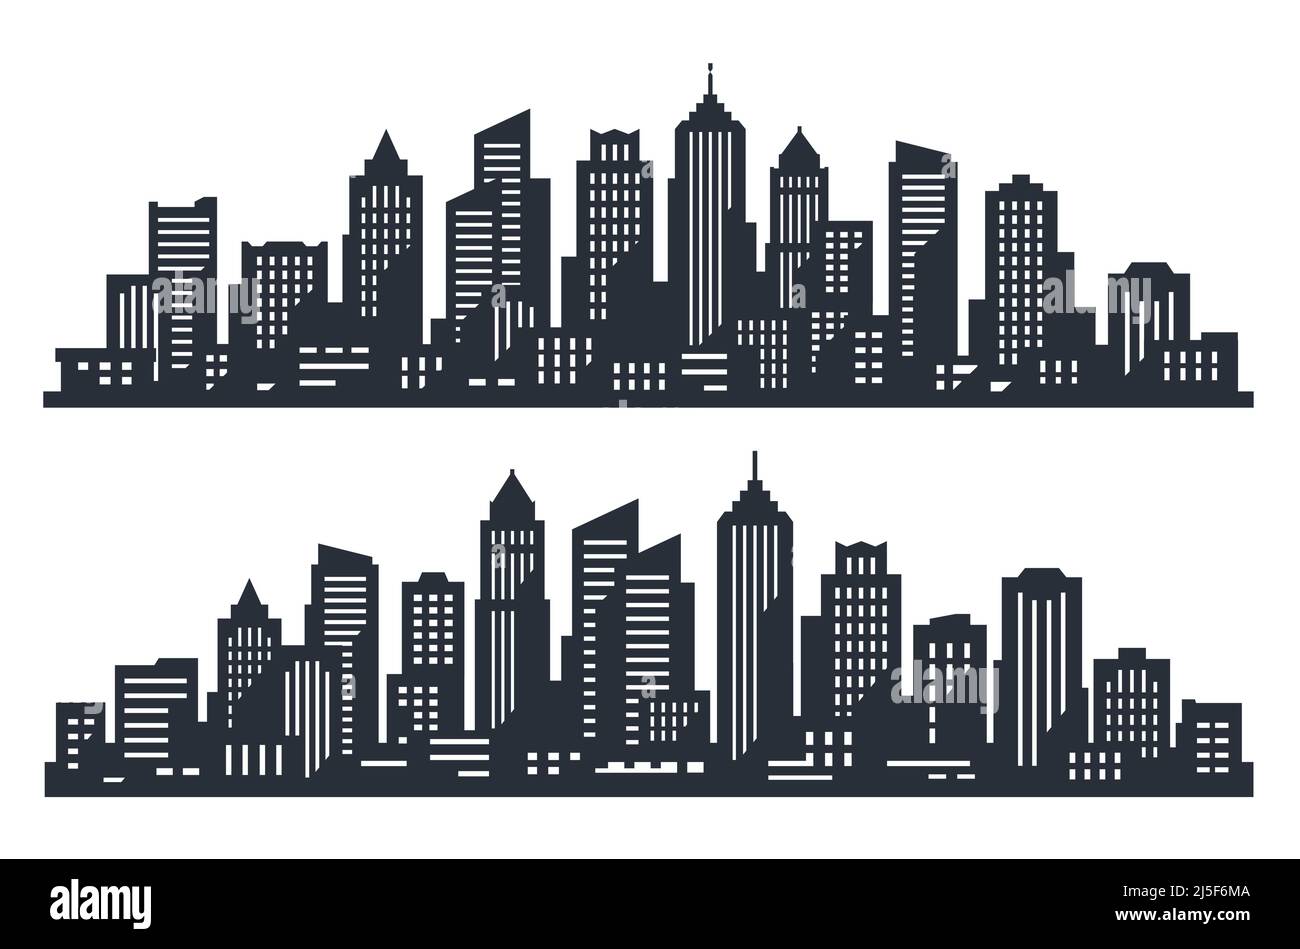 City panorama. Illustration urban landscape with skyline city office buildings. Outline cityscape. Horizontal panorama Stock Vector